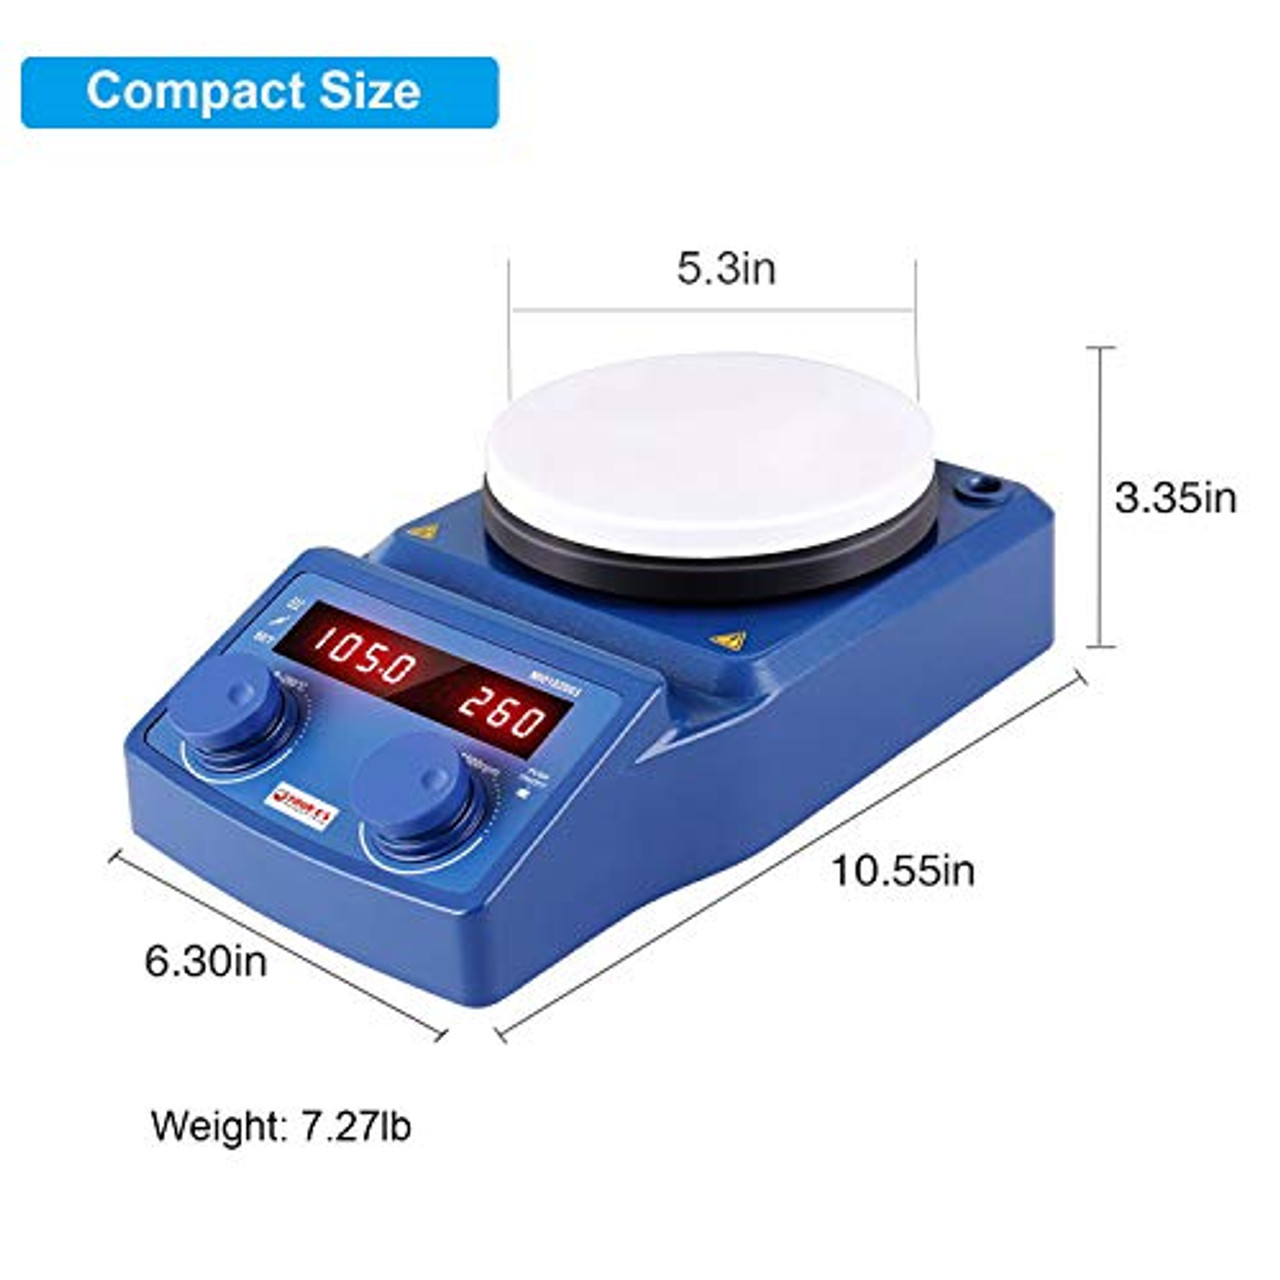 5 Inch Hot Plate Magnetic Stirrer  with LED Digital Display - 4E's USA